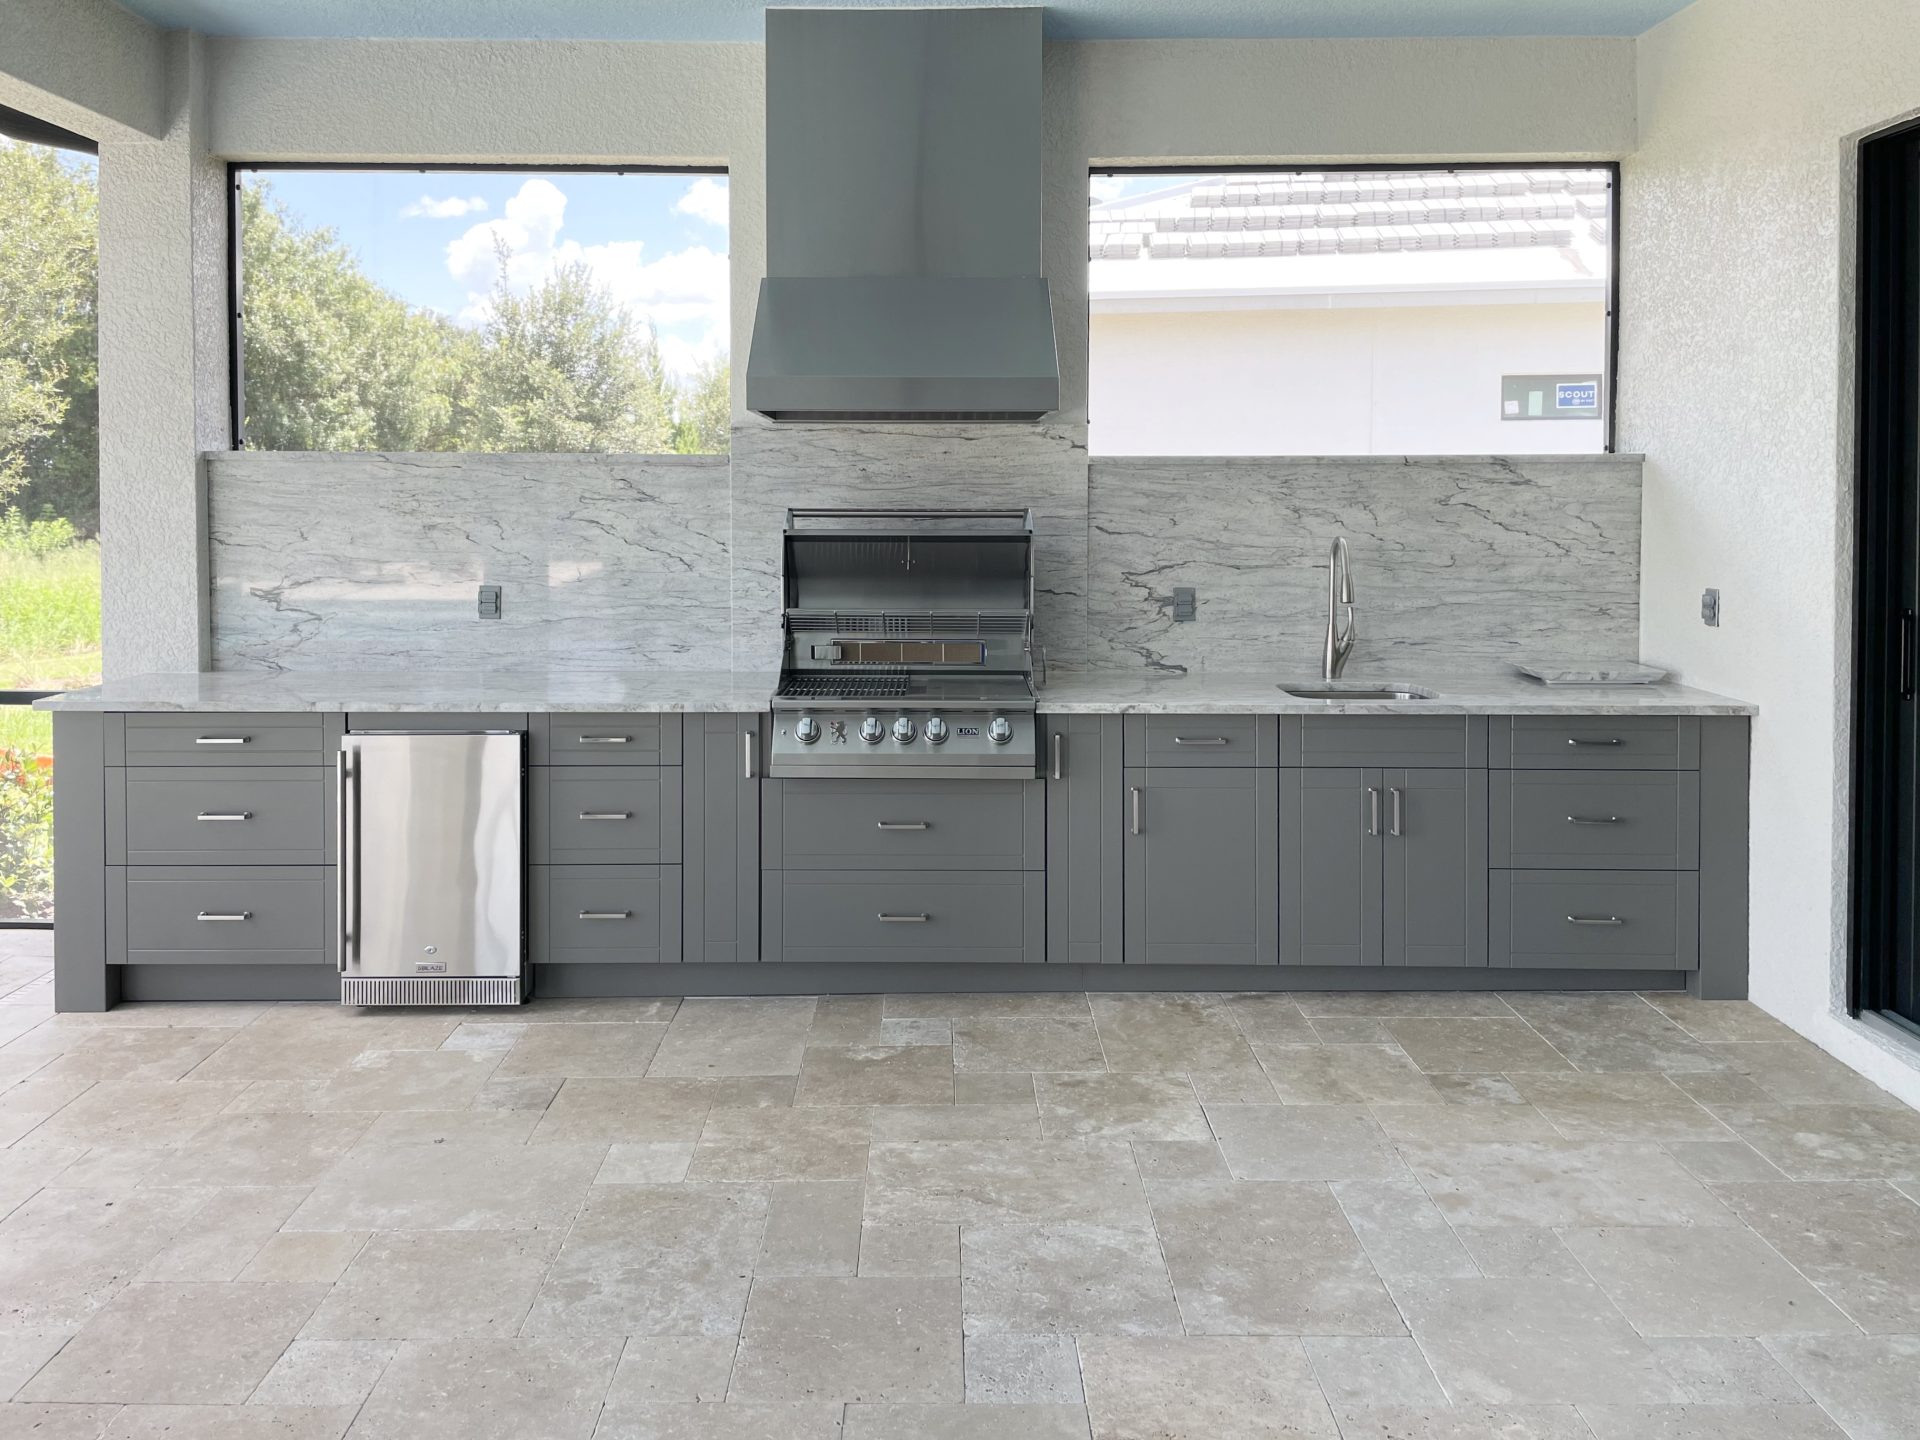 OUTDOOR KITCHEN 9. Custom outdoor kitchen in Lakewood Ranch, FL. Kitchen features slate grey, shaker style cabinets. Appliances include Lion grill, Cypress outdoor hood, stainless hood chase, Blaze stainless refrigerator and stainless bar pulls.